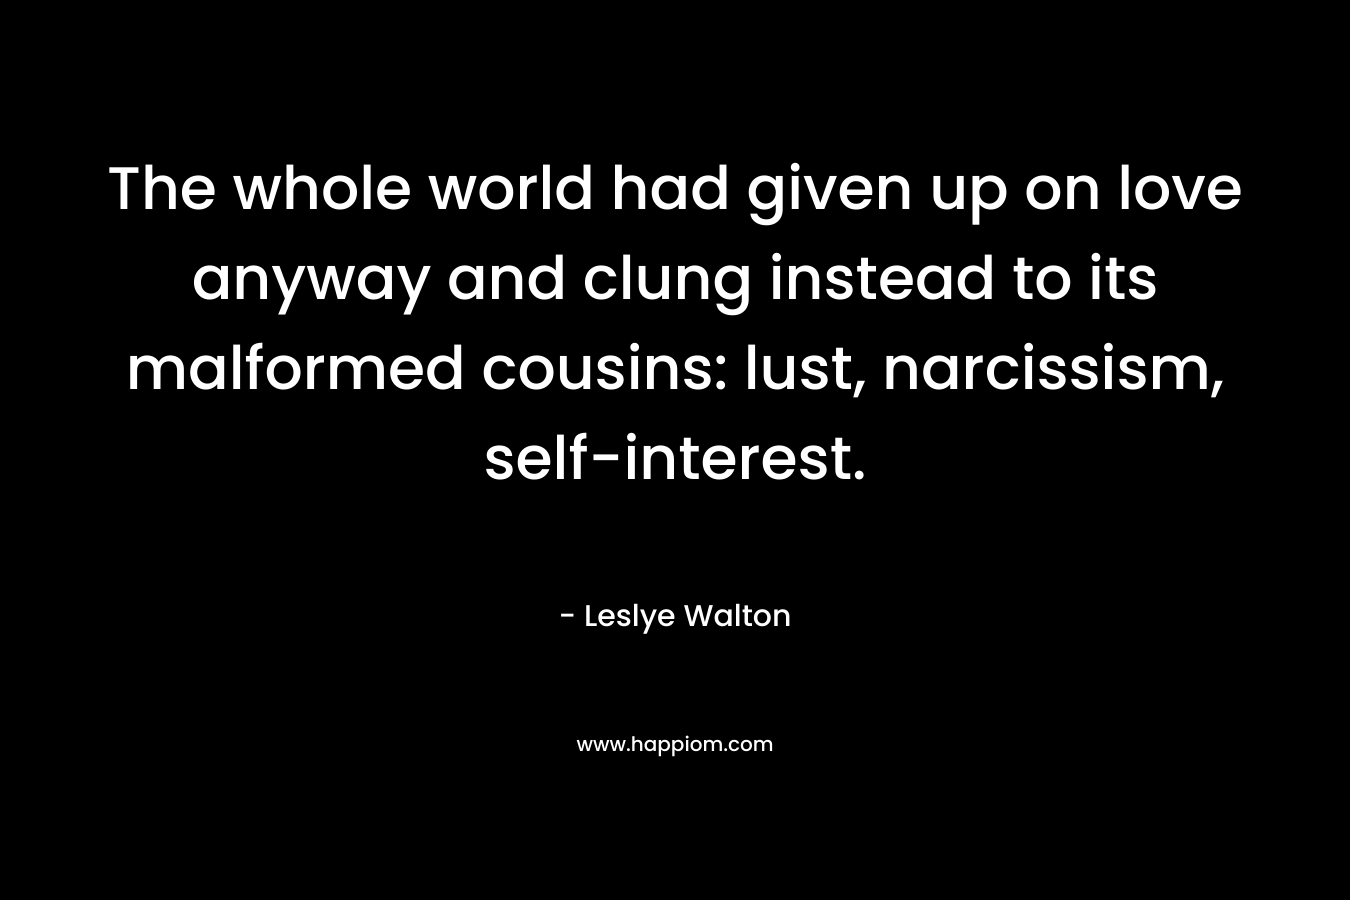 The whole world had given up on love anyway and clung instead to its malformed cousins: lust, narcissism, self-interest. – Leslye Walton